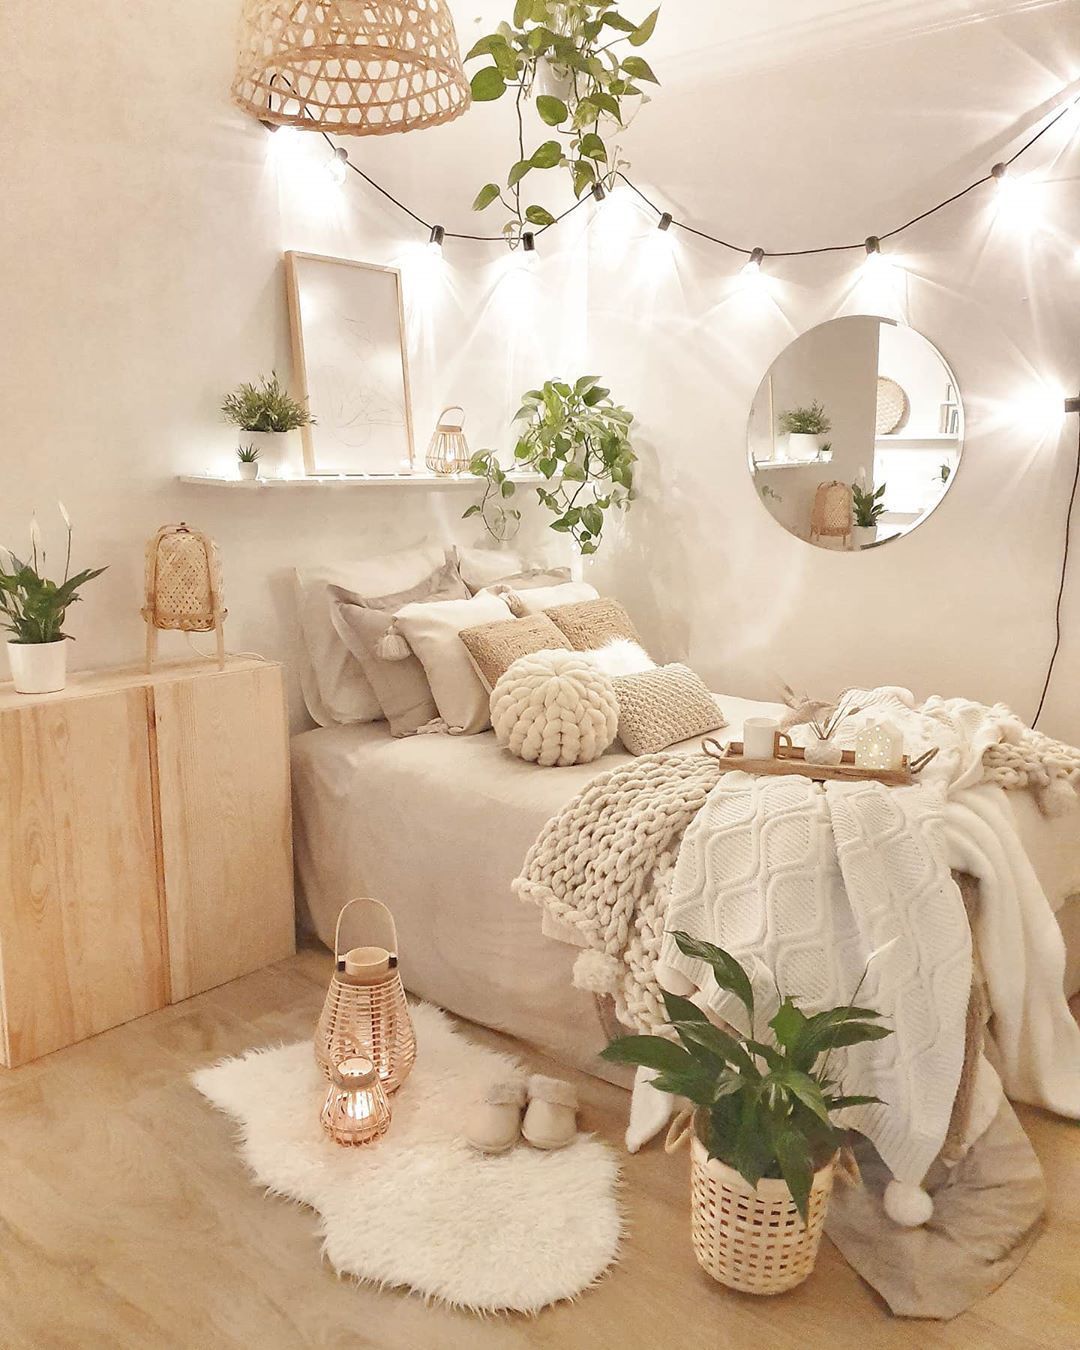 50 Small Bedroom Ideas to Maximize Space and Create a Cozy Retreat